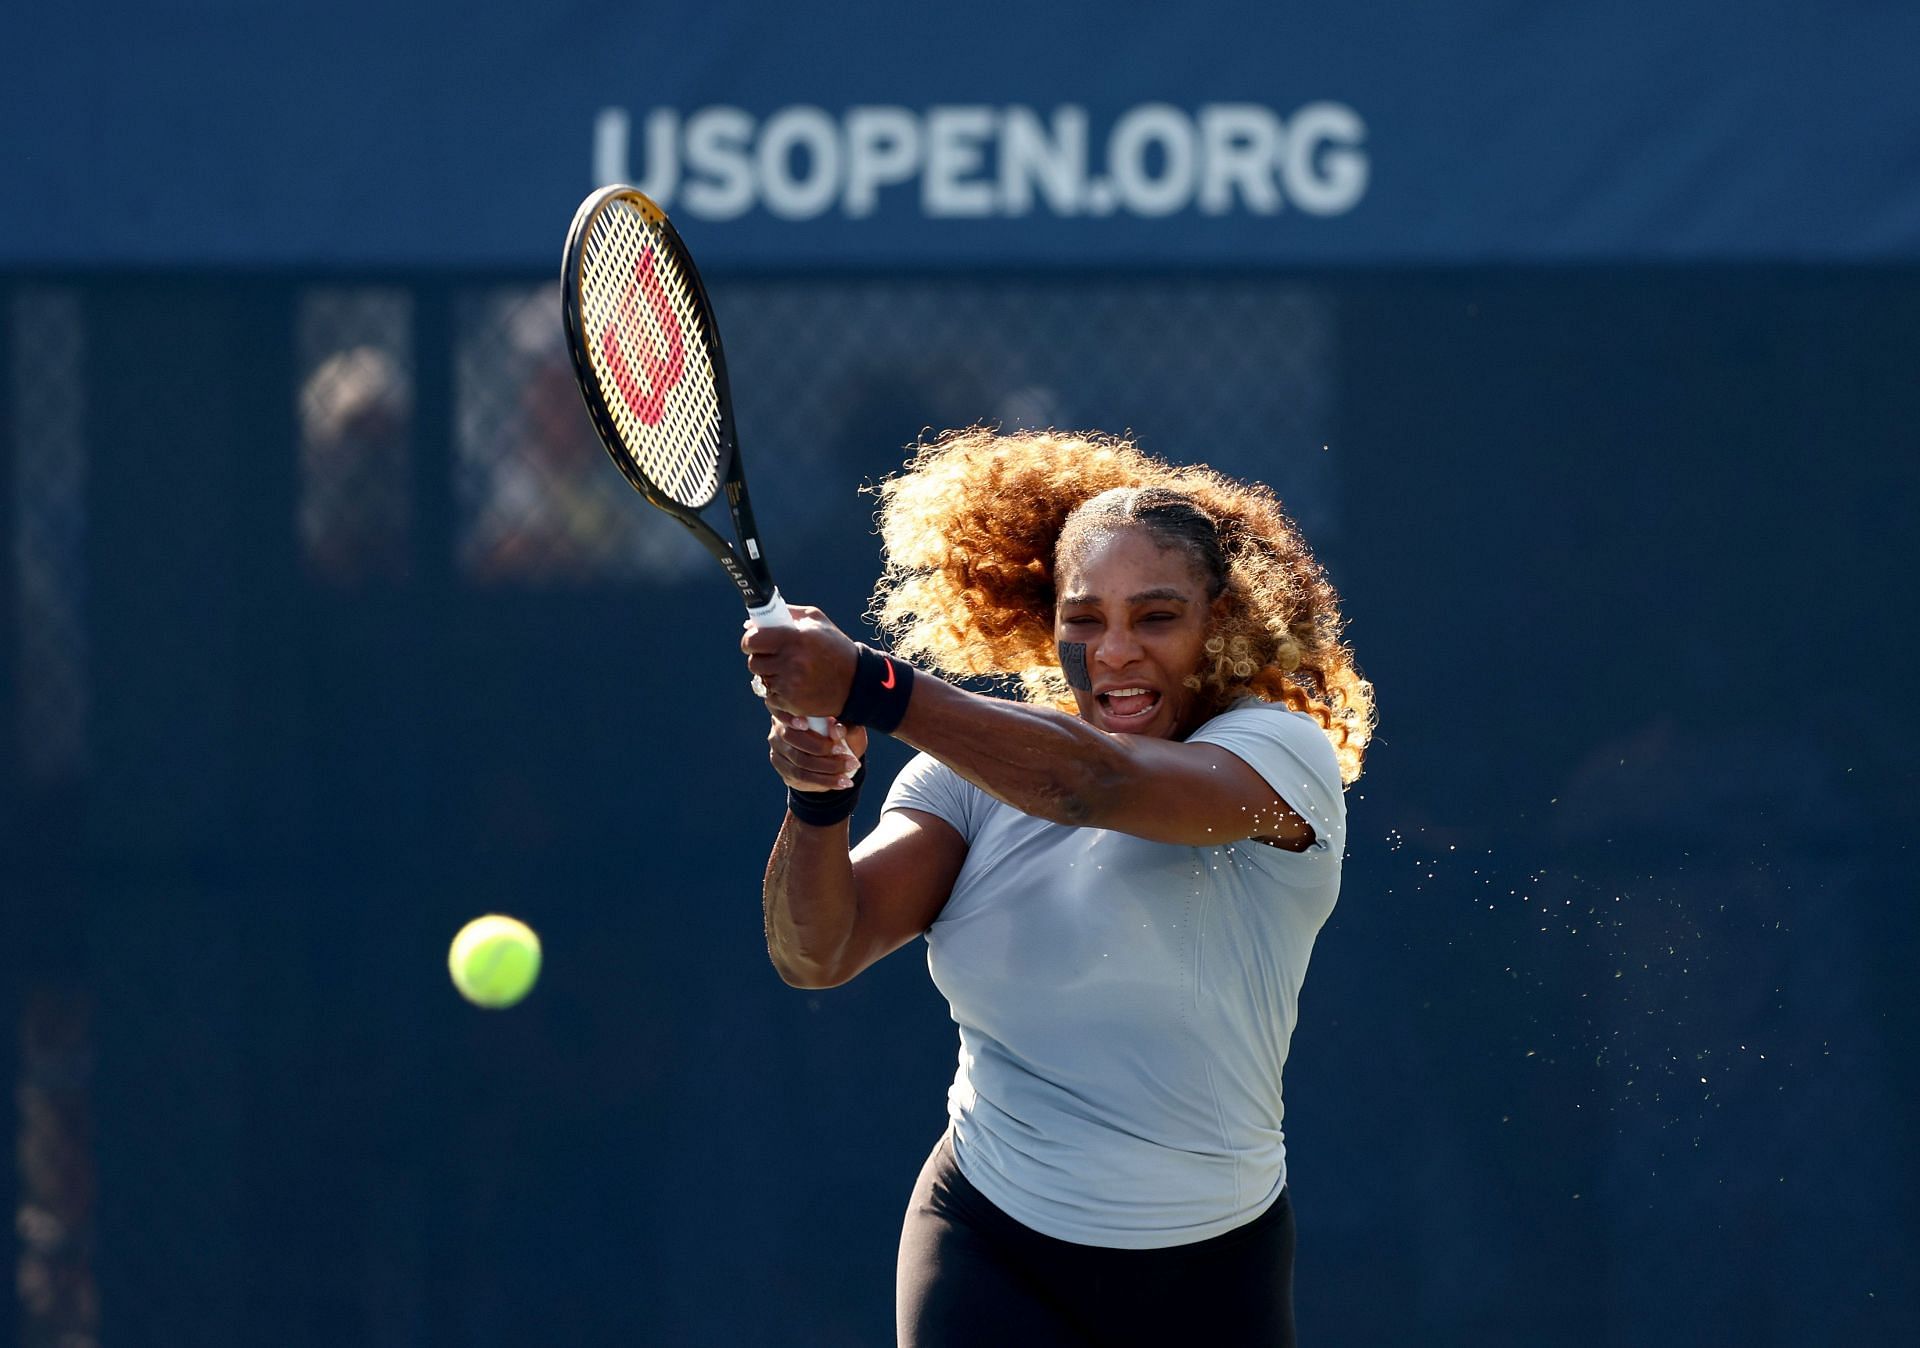 Serena Williams announced that she will retire from tennis later this year.